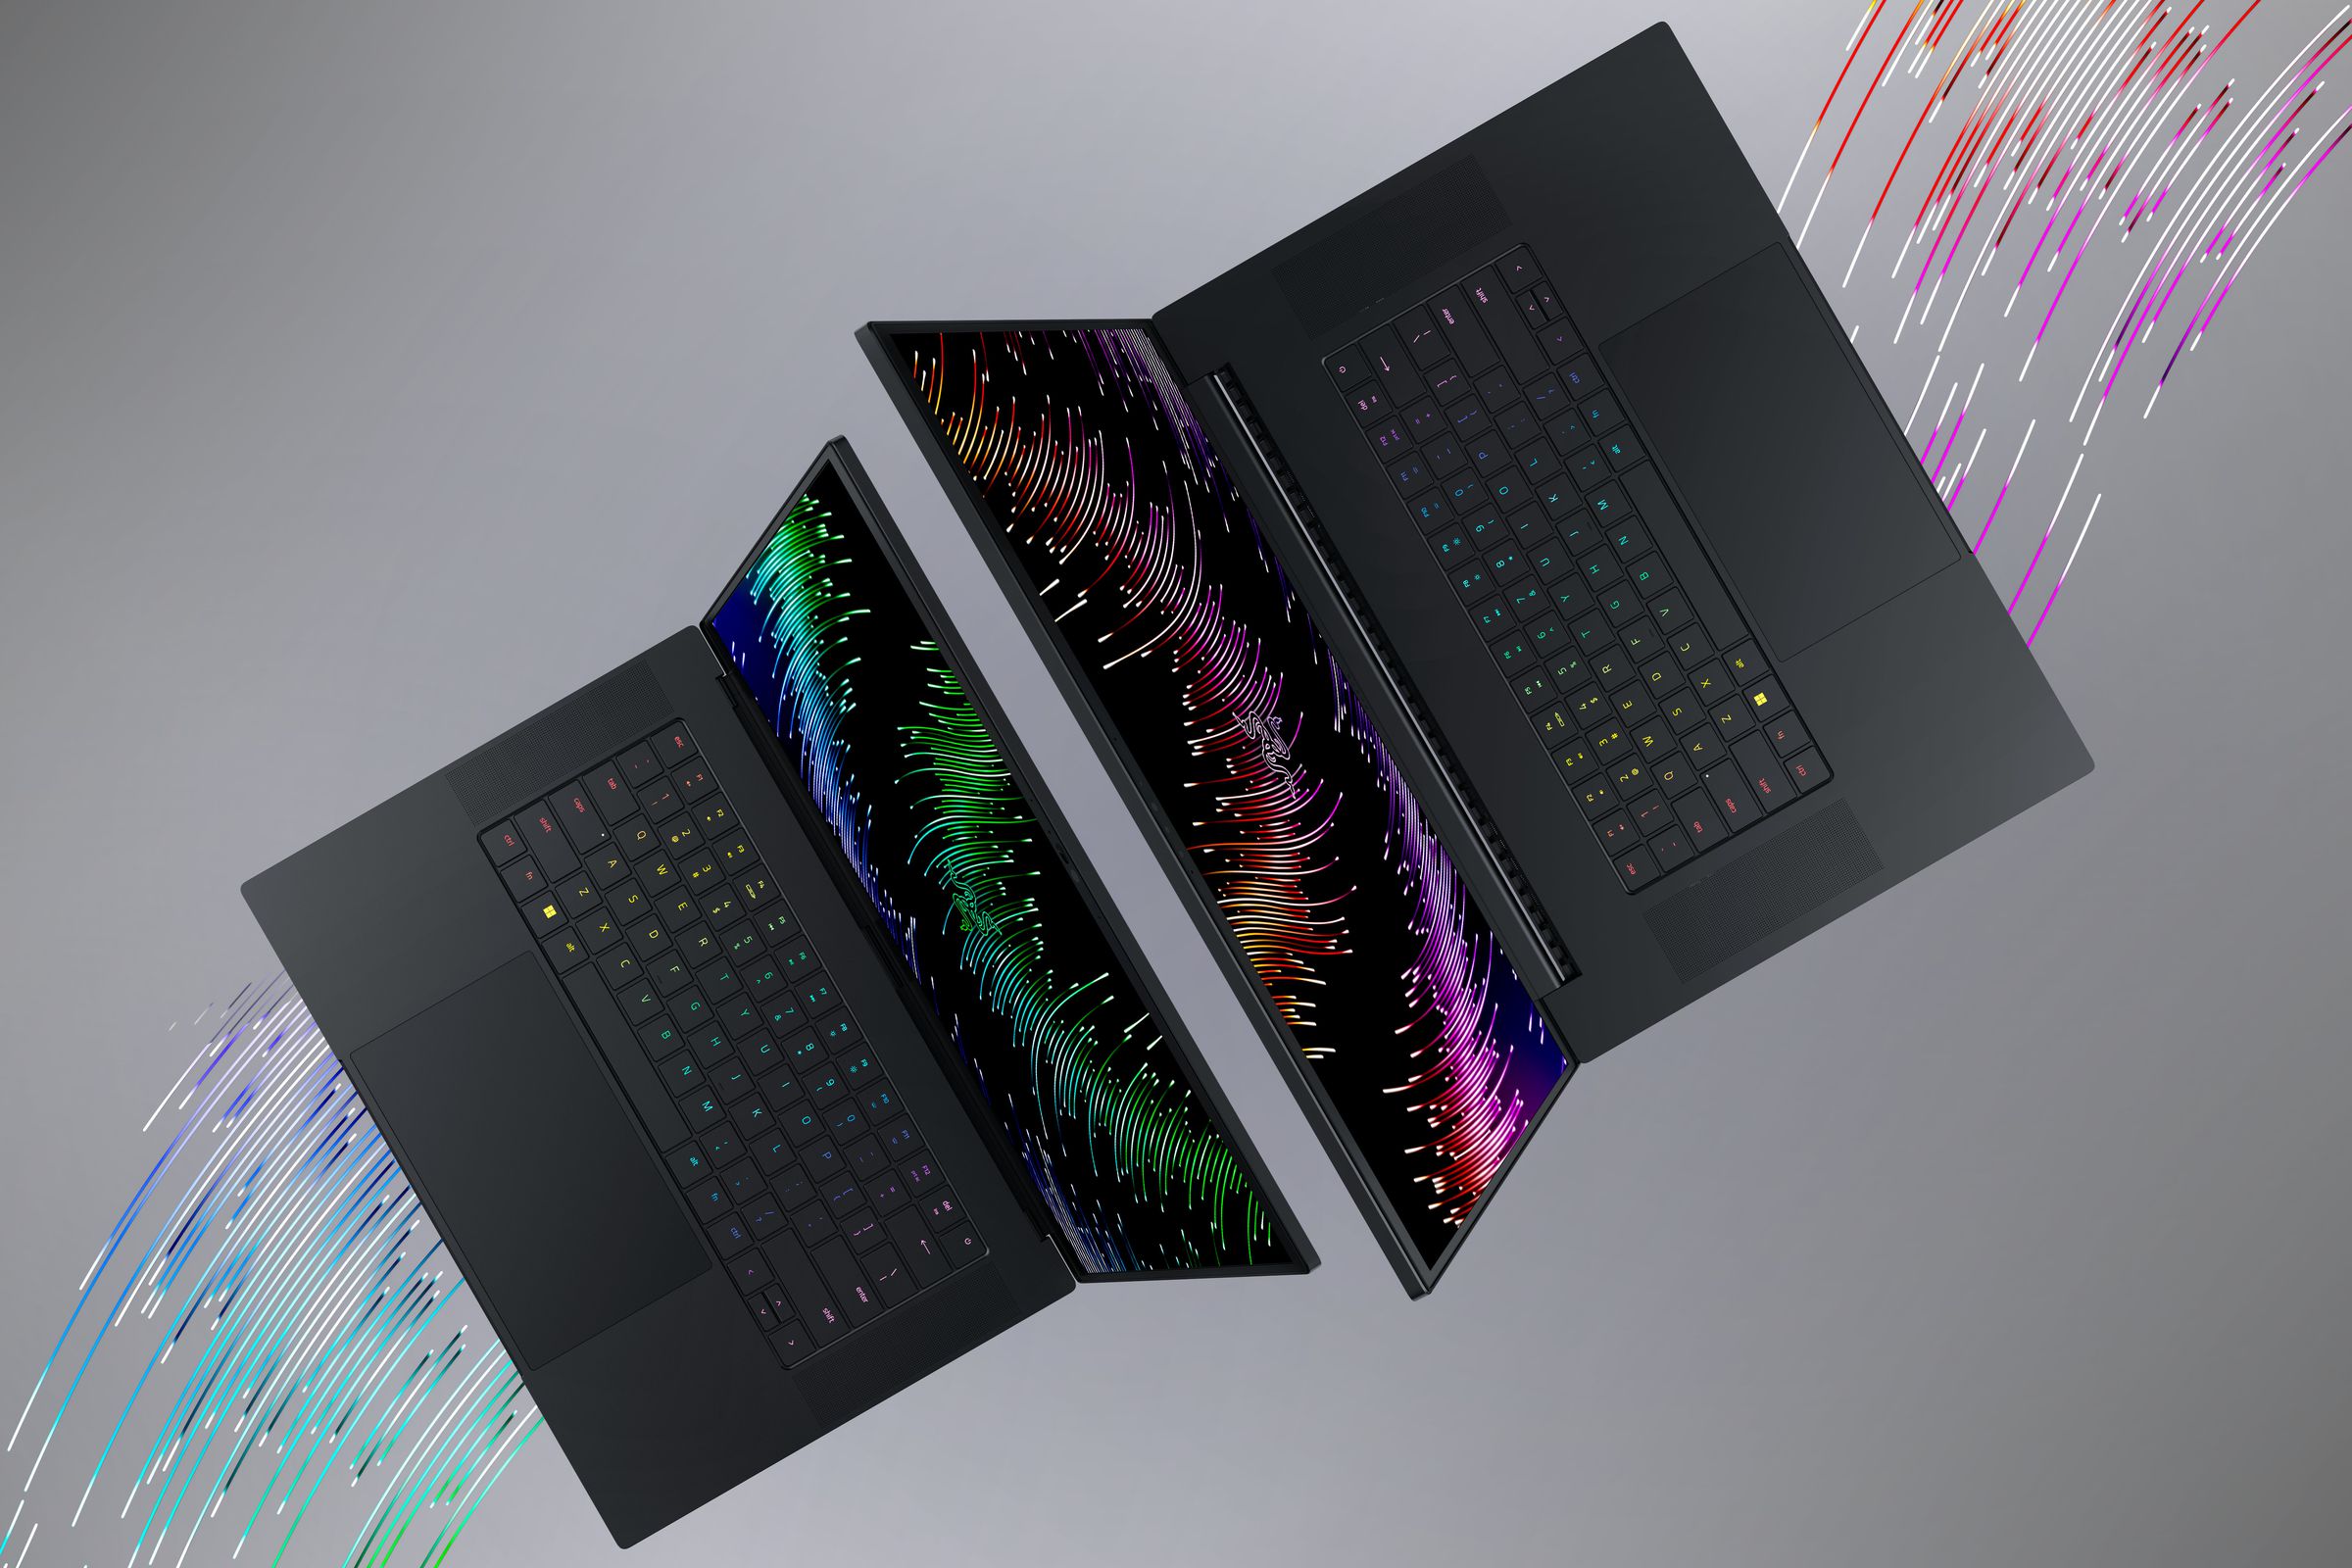 An artistic render of the Razer Blade 16 and 18 gaming laptops shows from the top-down, revealing their displays, keyboards, and trackpads.